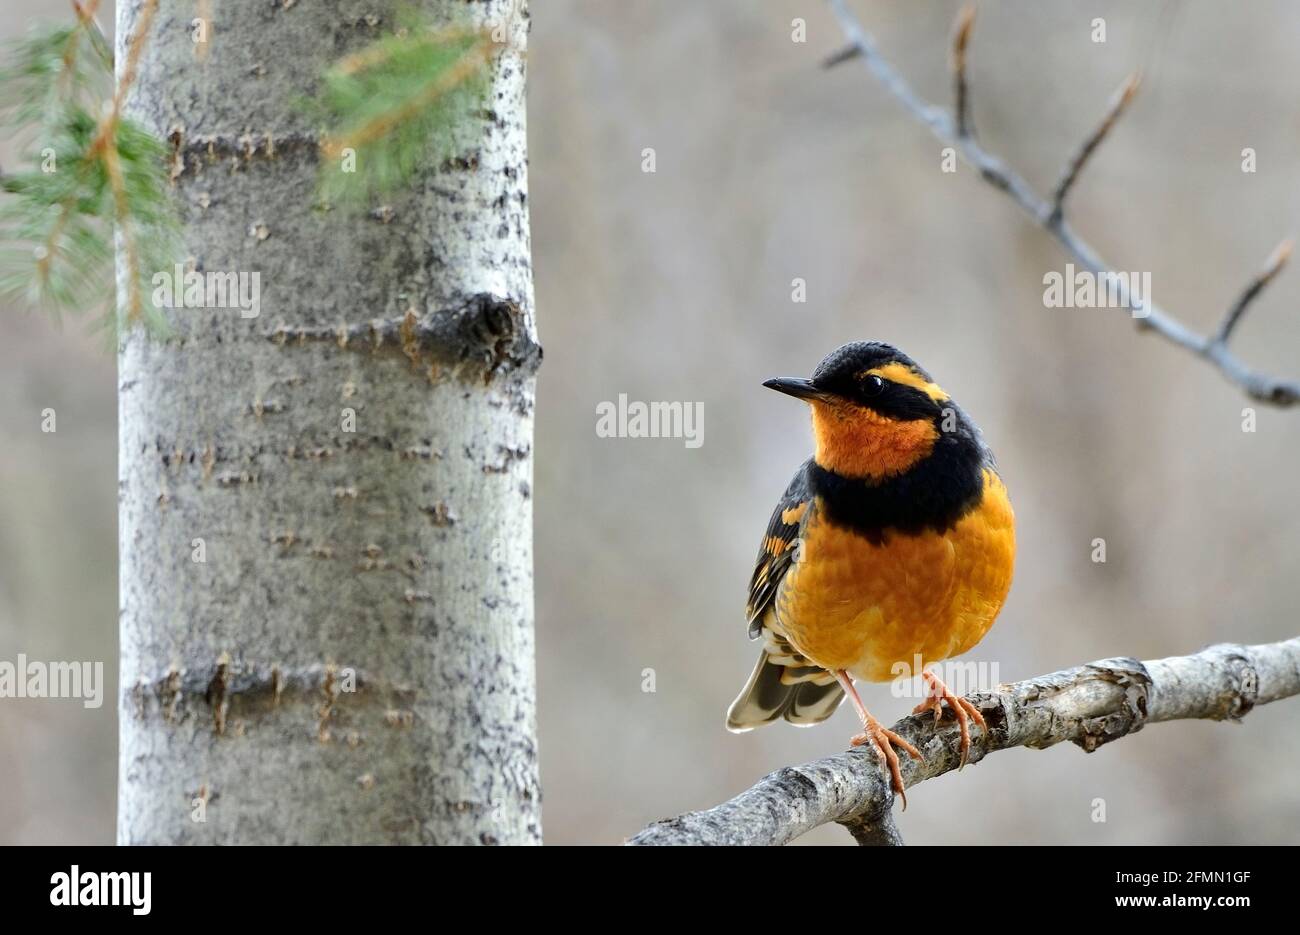 A brightly colored varied thrush 'Ixoreus naevius',  bird perched on the branch of a poplar tree in rural Alberta Canada Stock Photo